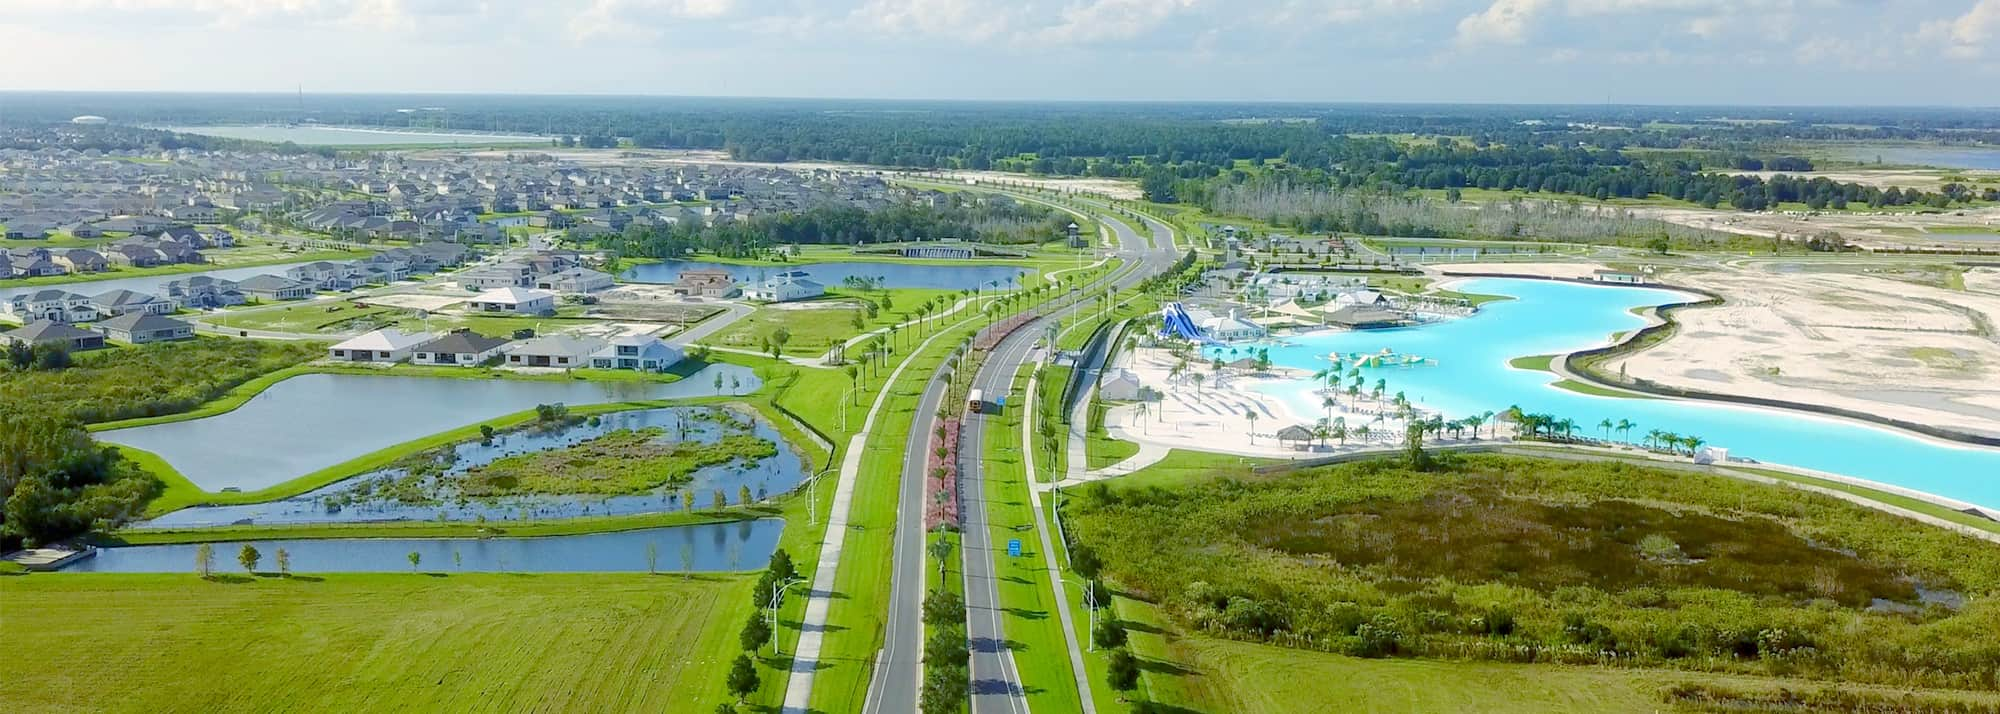 The entrance road to Epperson by MetroPlaces featuring spectacular landscaping, new houses and the first human-made Lagoon in the country.